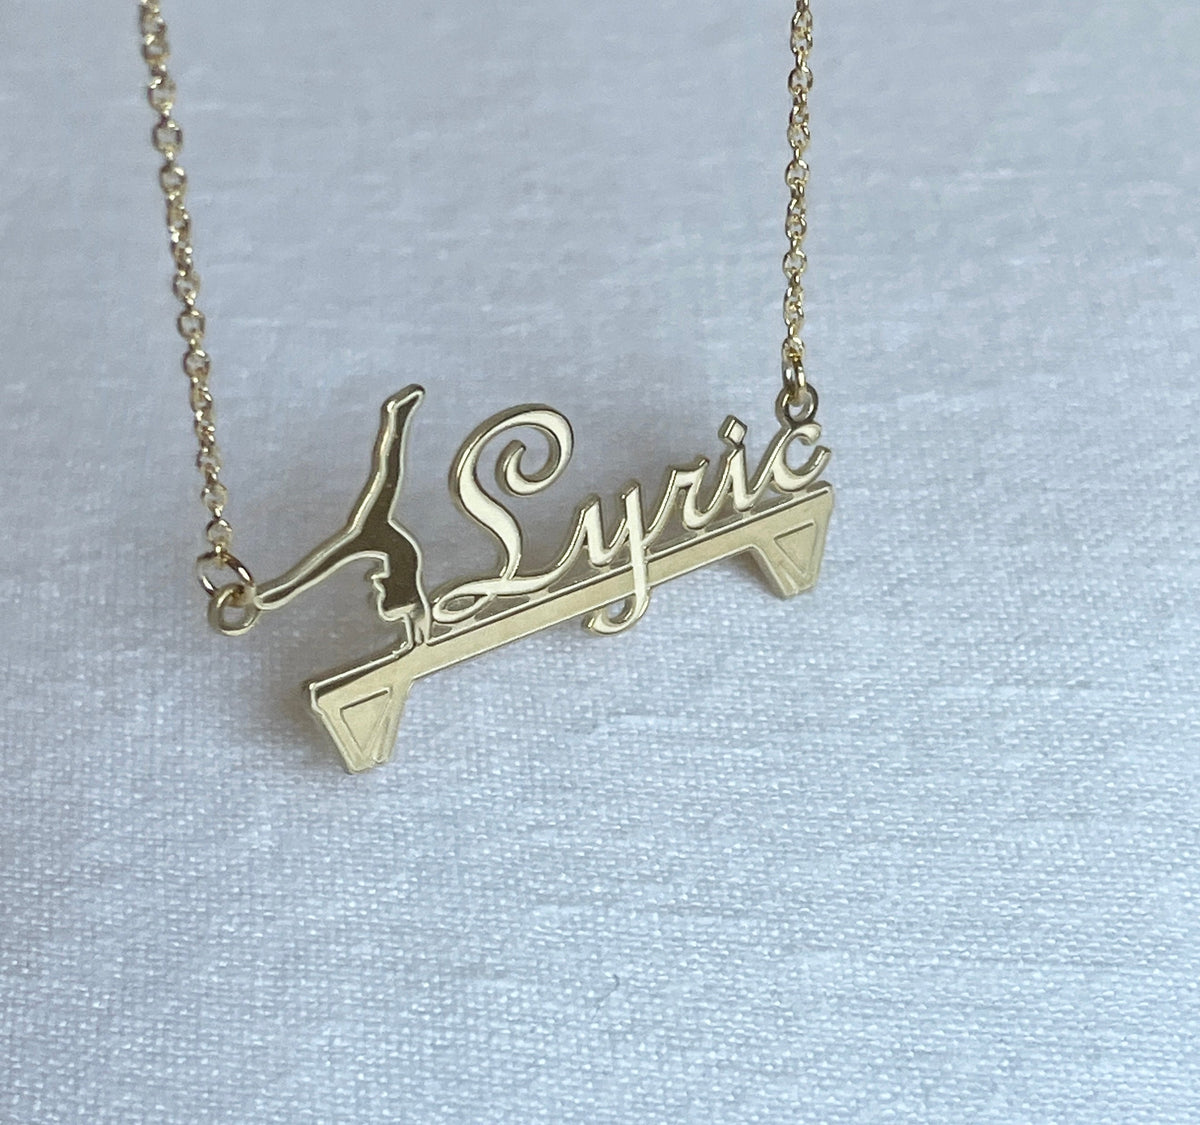 Personalized Gymnastics Pendant with Texture - 1.5 inches Wide in Sterling Silver or 10k Yellow or White Gold - Gift Box Included